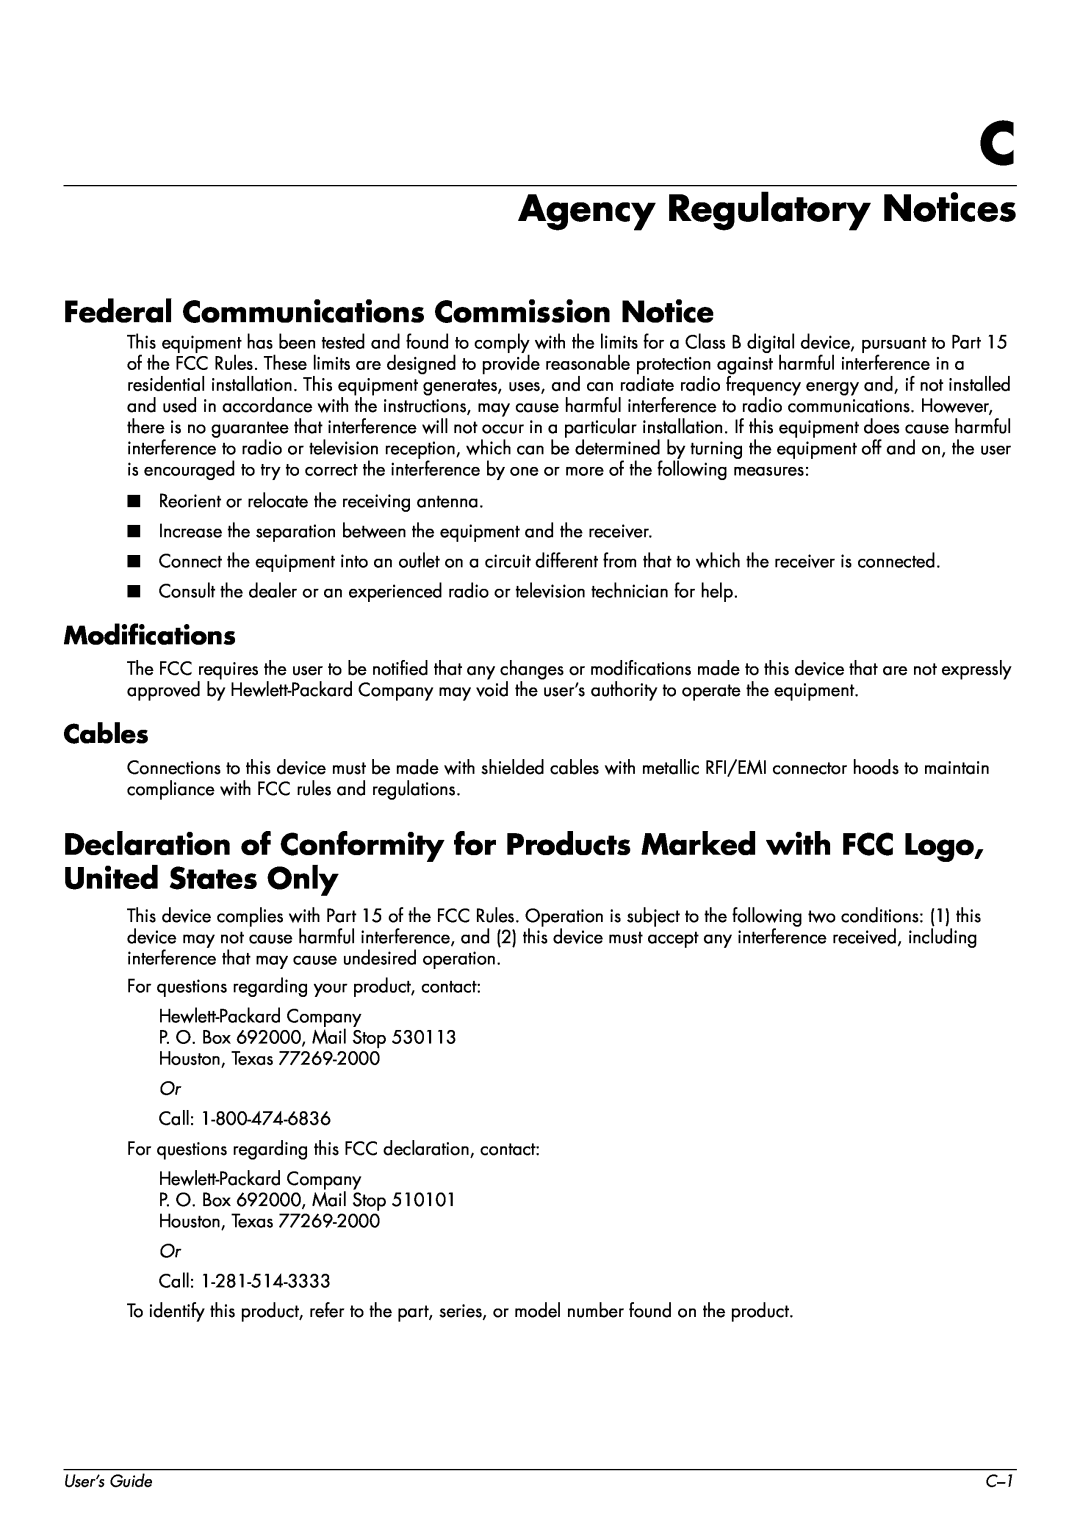 HP W2216, FP1707, W1907 manual Agency Regulatory Notices, Federal Communications Commission Notice, Modifications, Cables 